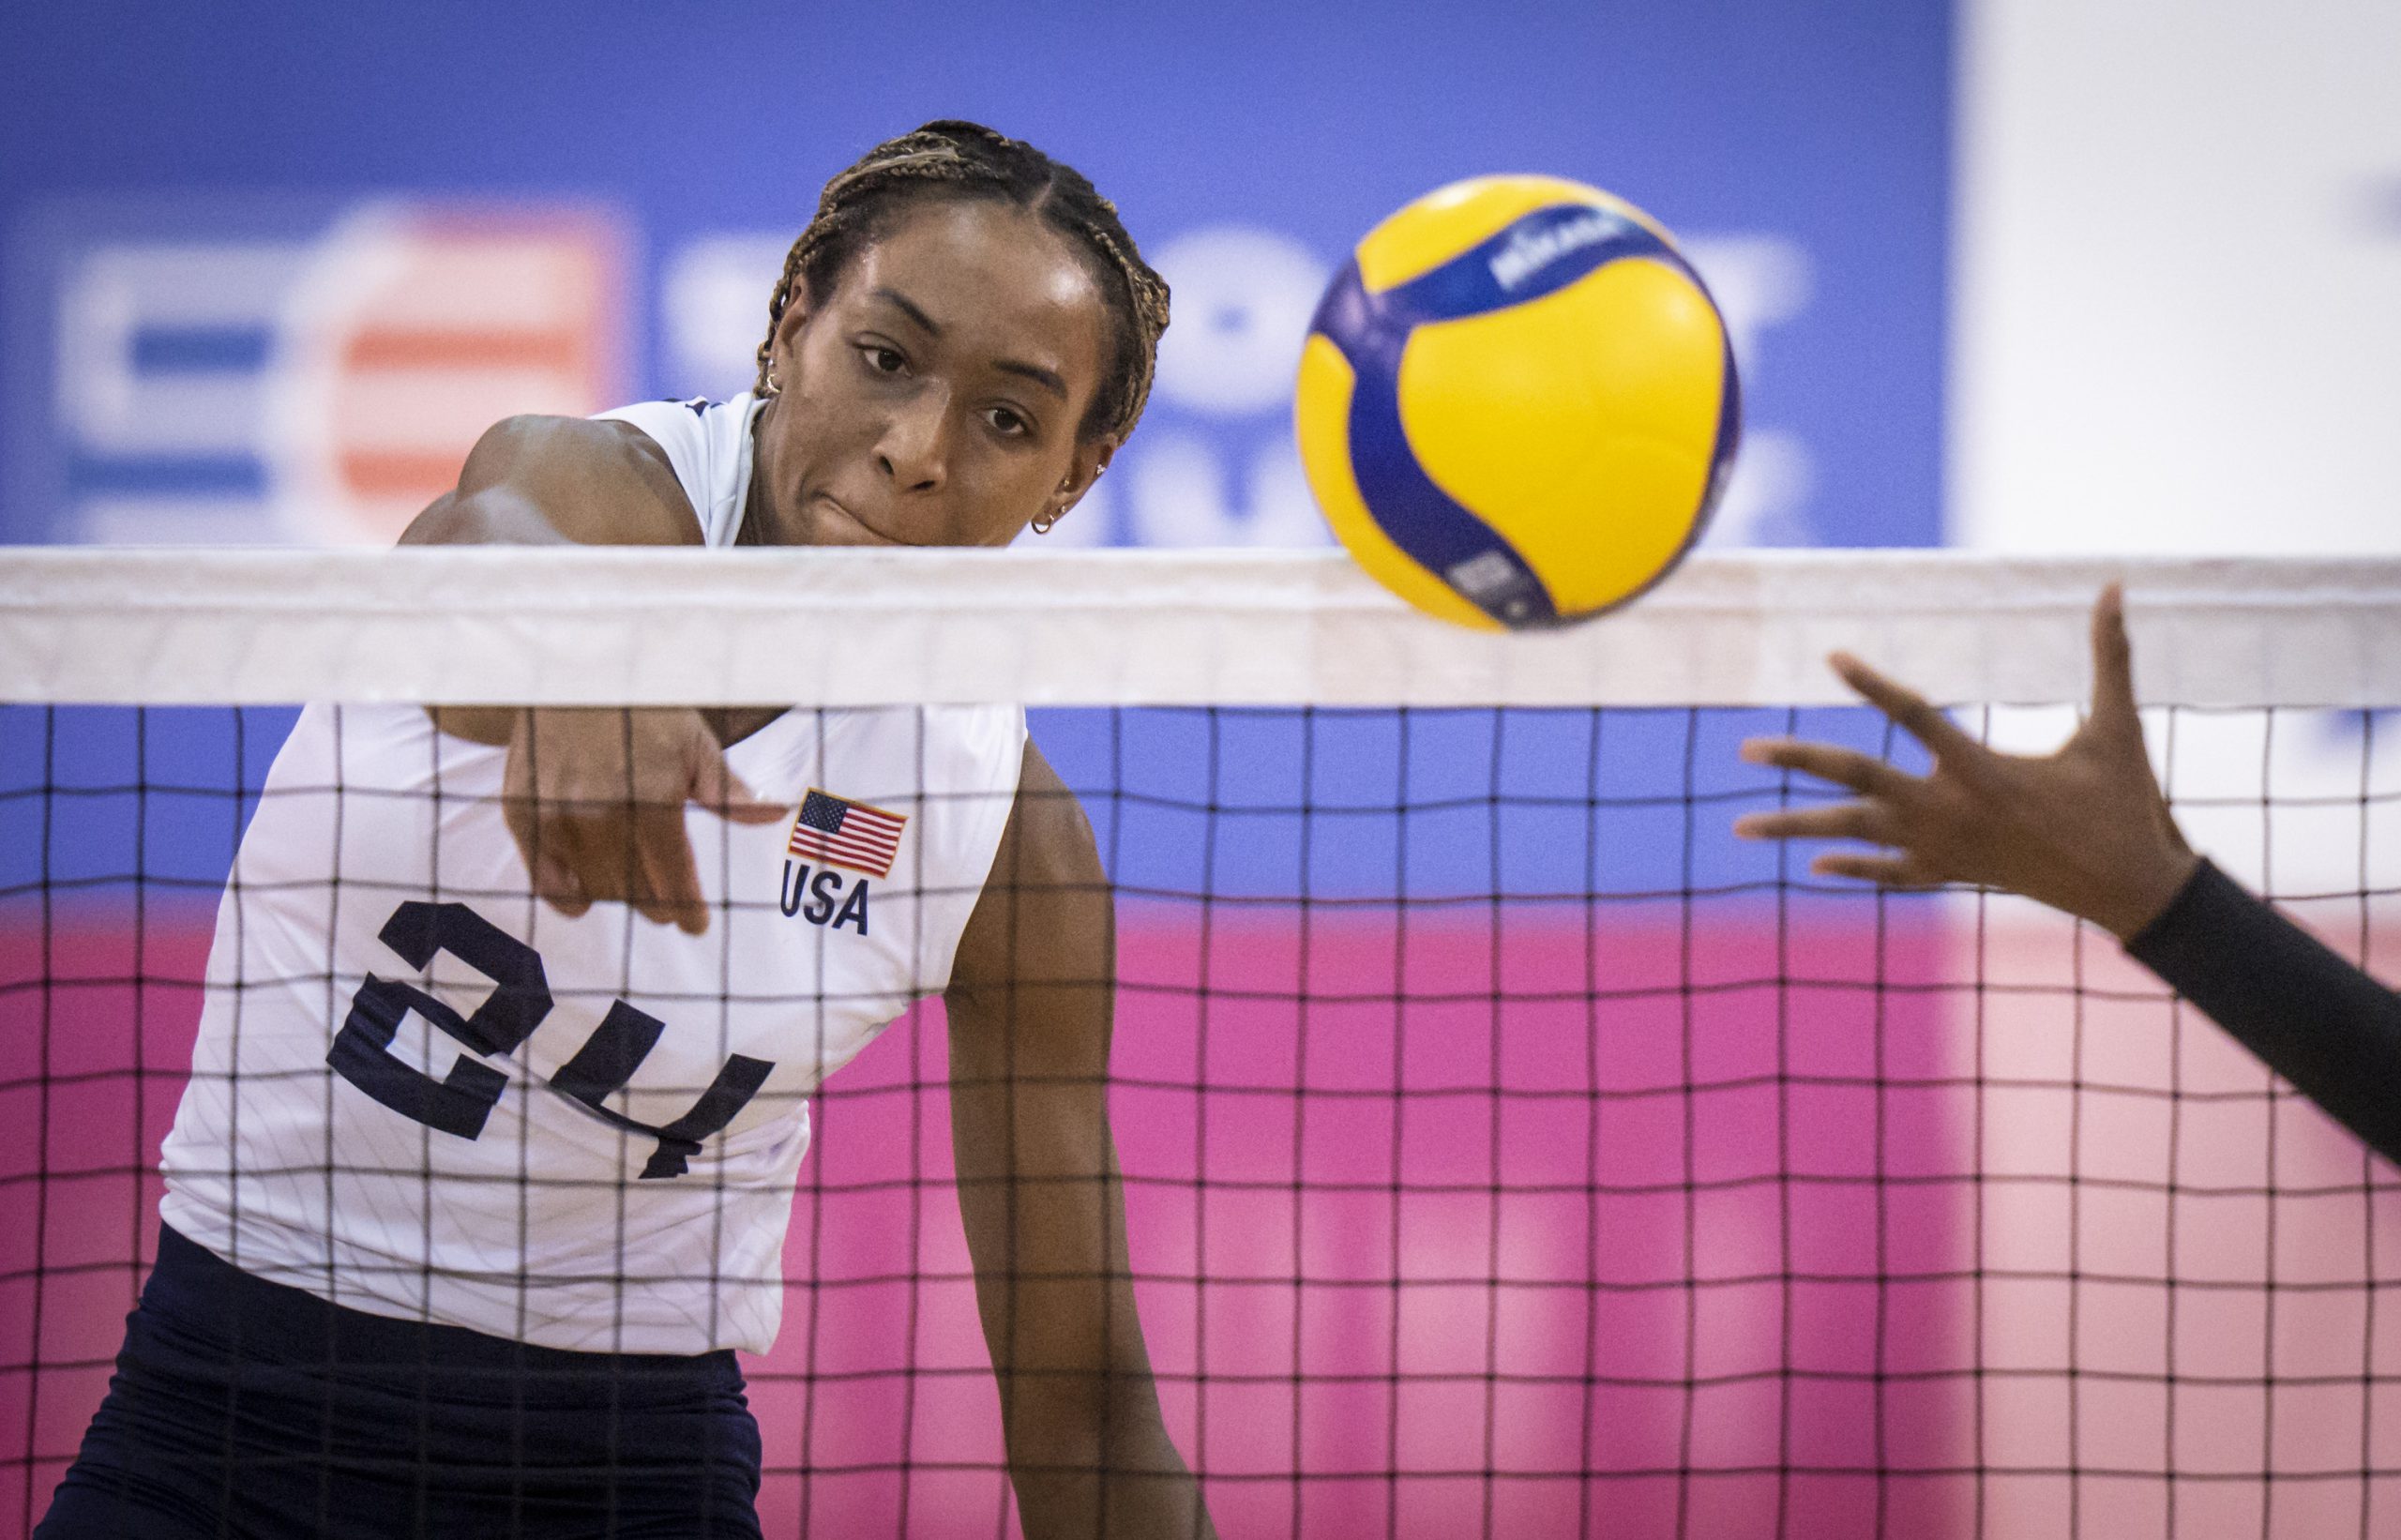 USA advances to semis after win over Dominican Republic